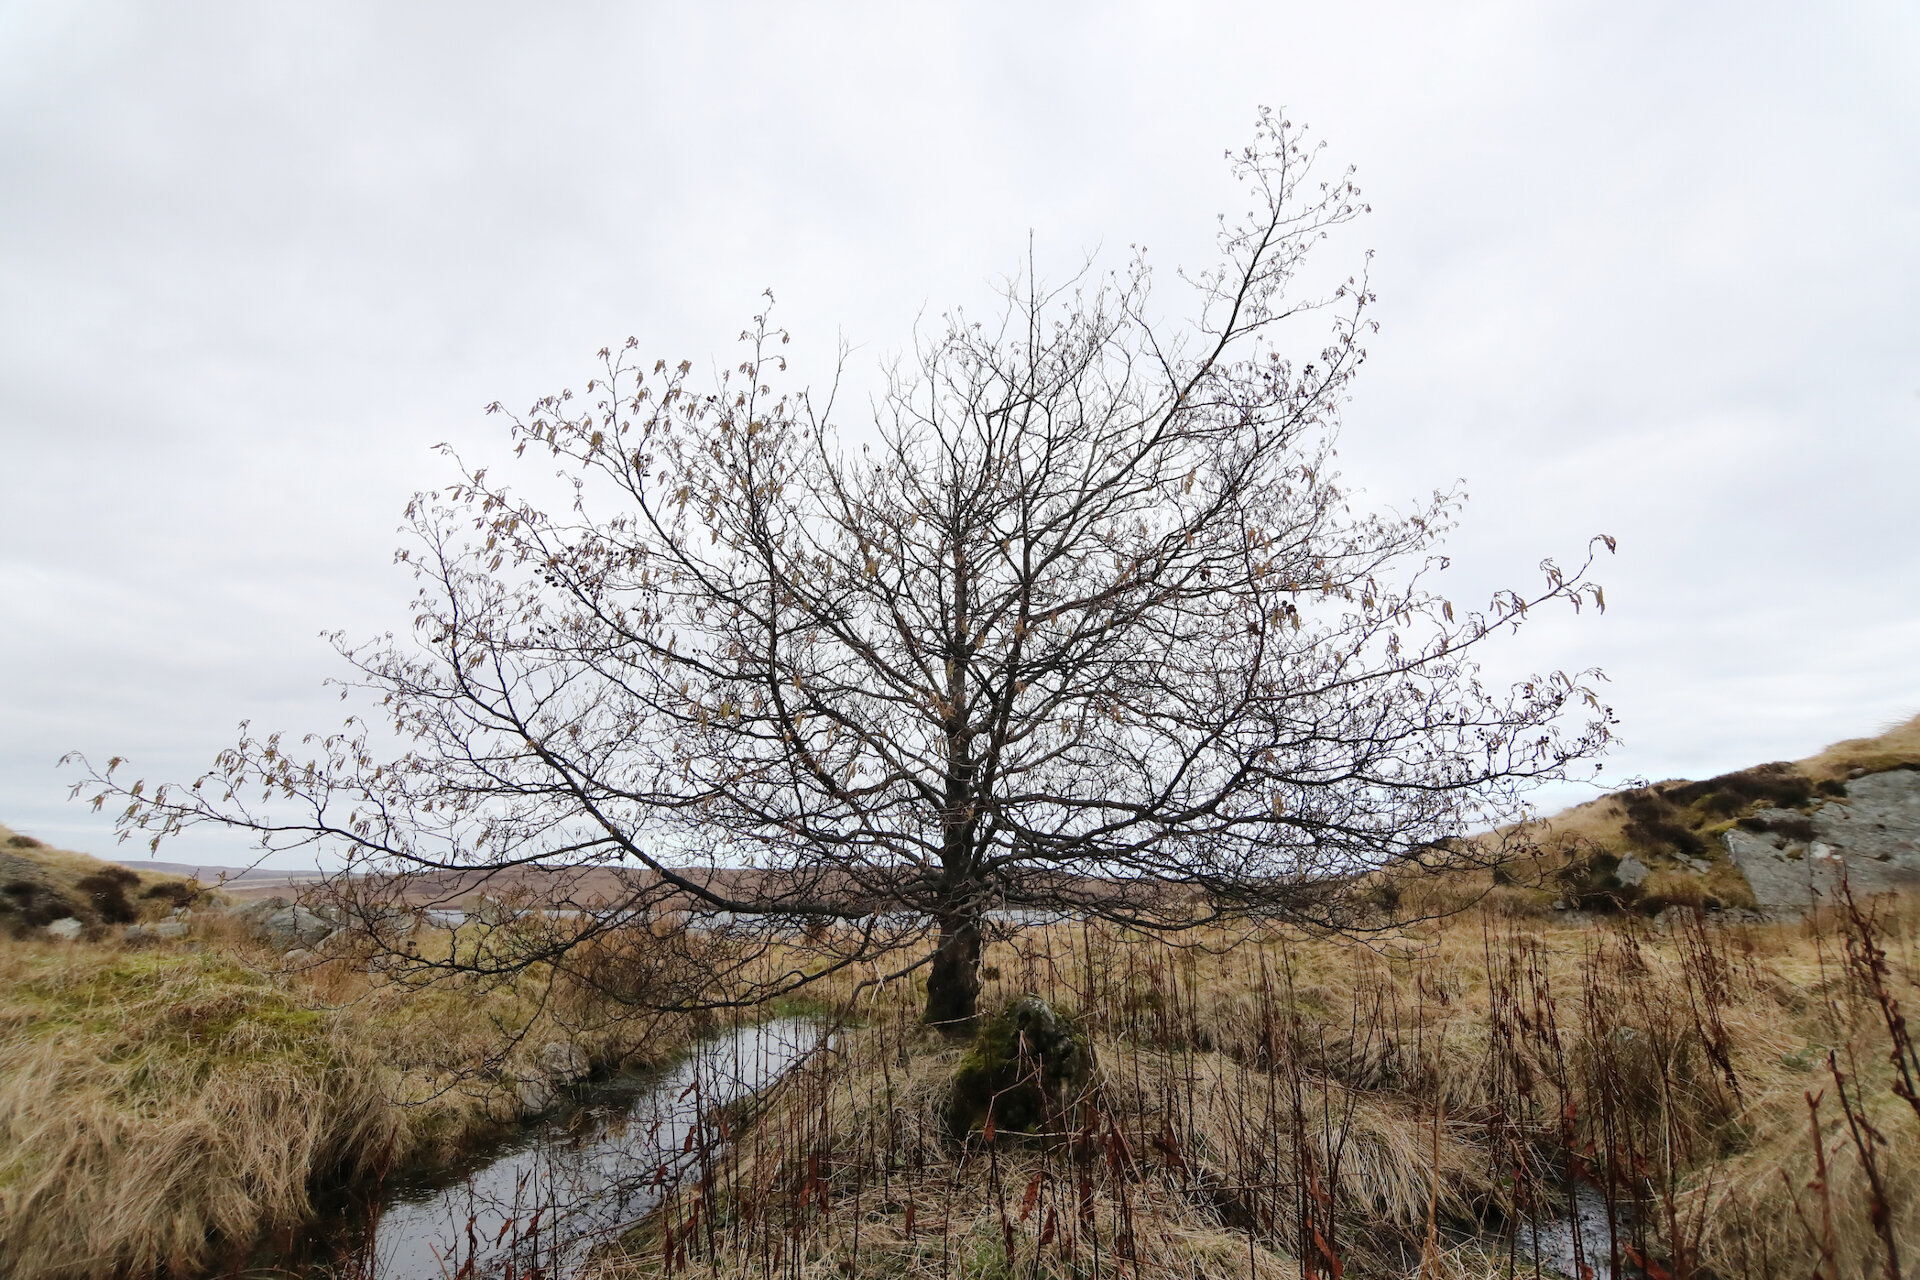 An Alder tree in Shetland, which looks similar in appearance to the Vikings' sacred Yggdrasil